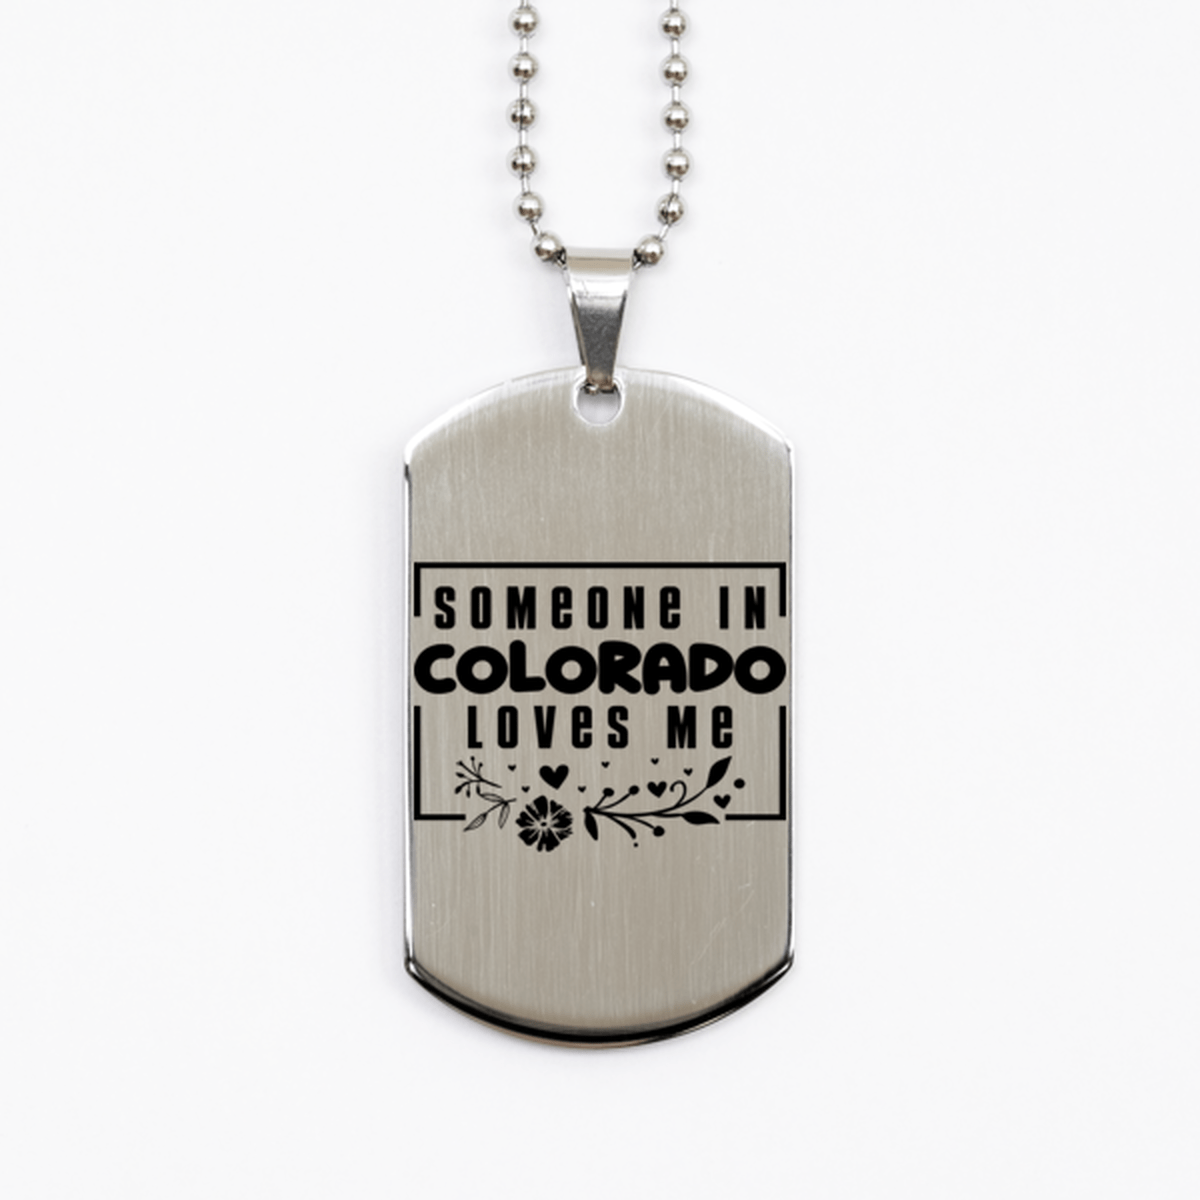 Cute Colorado Silver Dog Tag Necklace, Someone in Colorado Loves Me, Best Birthday Gifts from Colorado Friends & Family